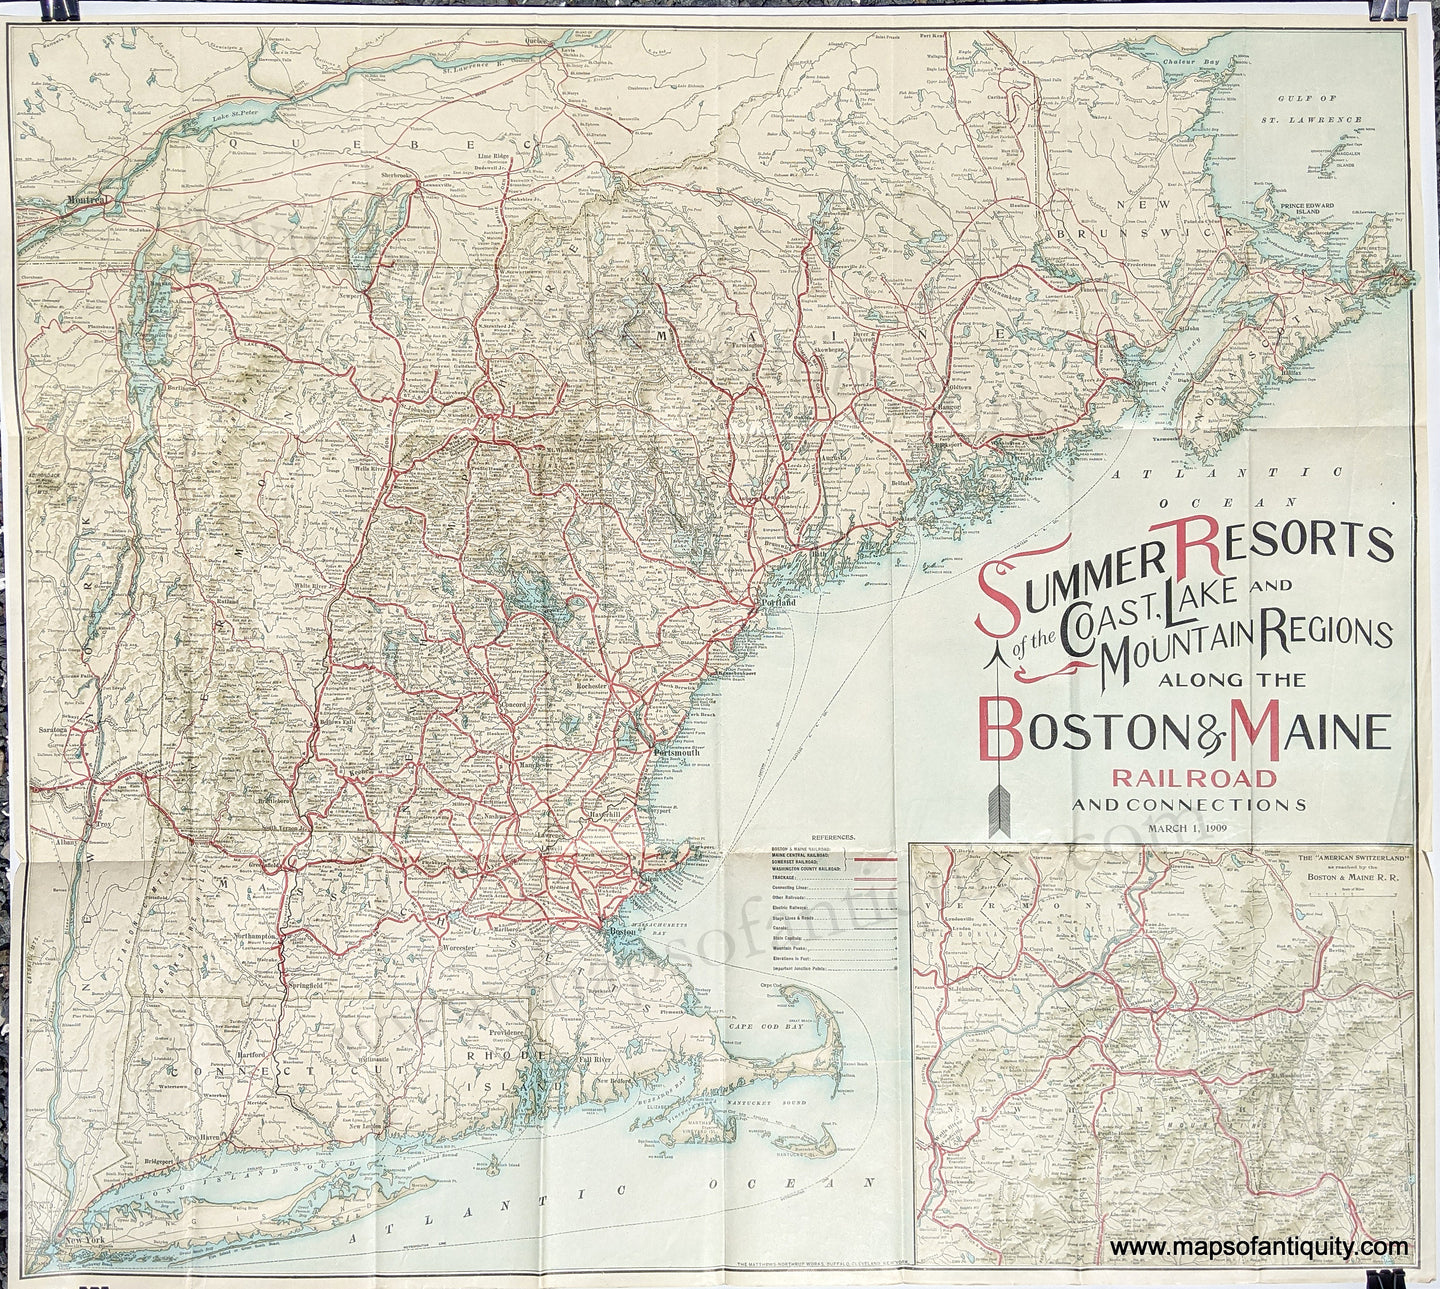 Antique-Printed-Color-Railroad-Map-Summer-Resorts-of-the-Coast-Lake-and-Mountain-Regions-along-the-Boston-&-Maine-Railroad-and-Connections-**********-United-States-Northeast-1915-Matthews-Northrup-Works-Maps-Of-Antiquity